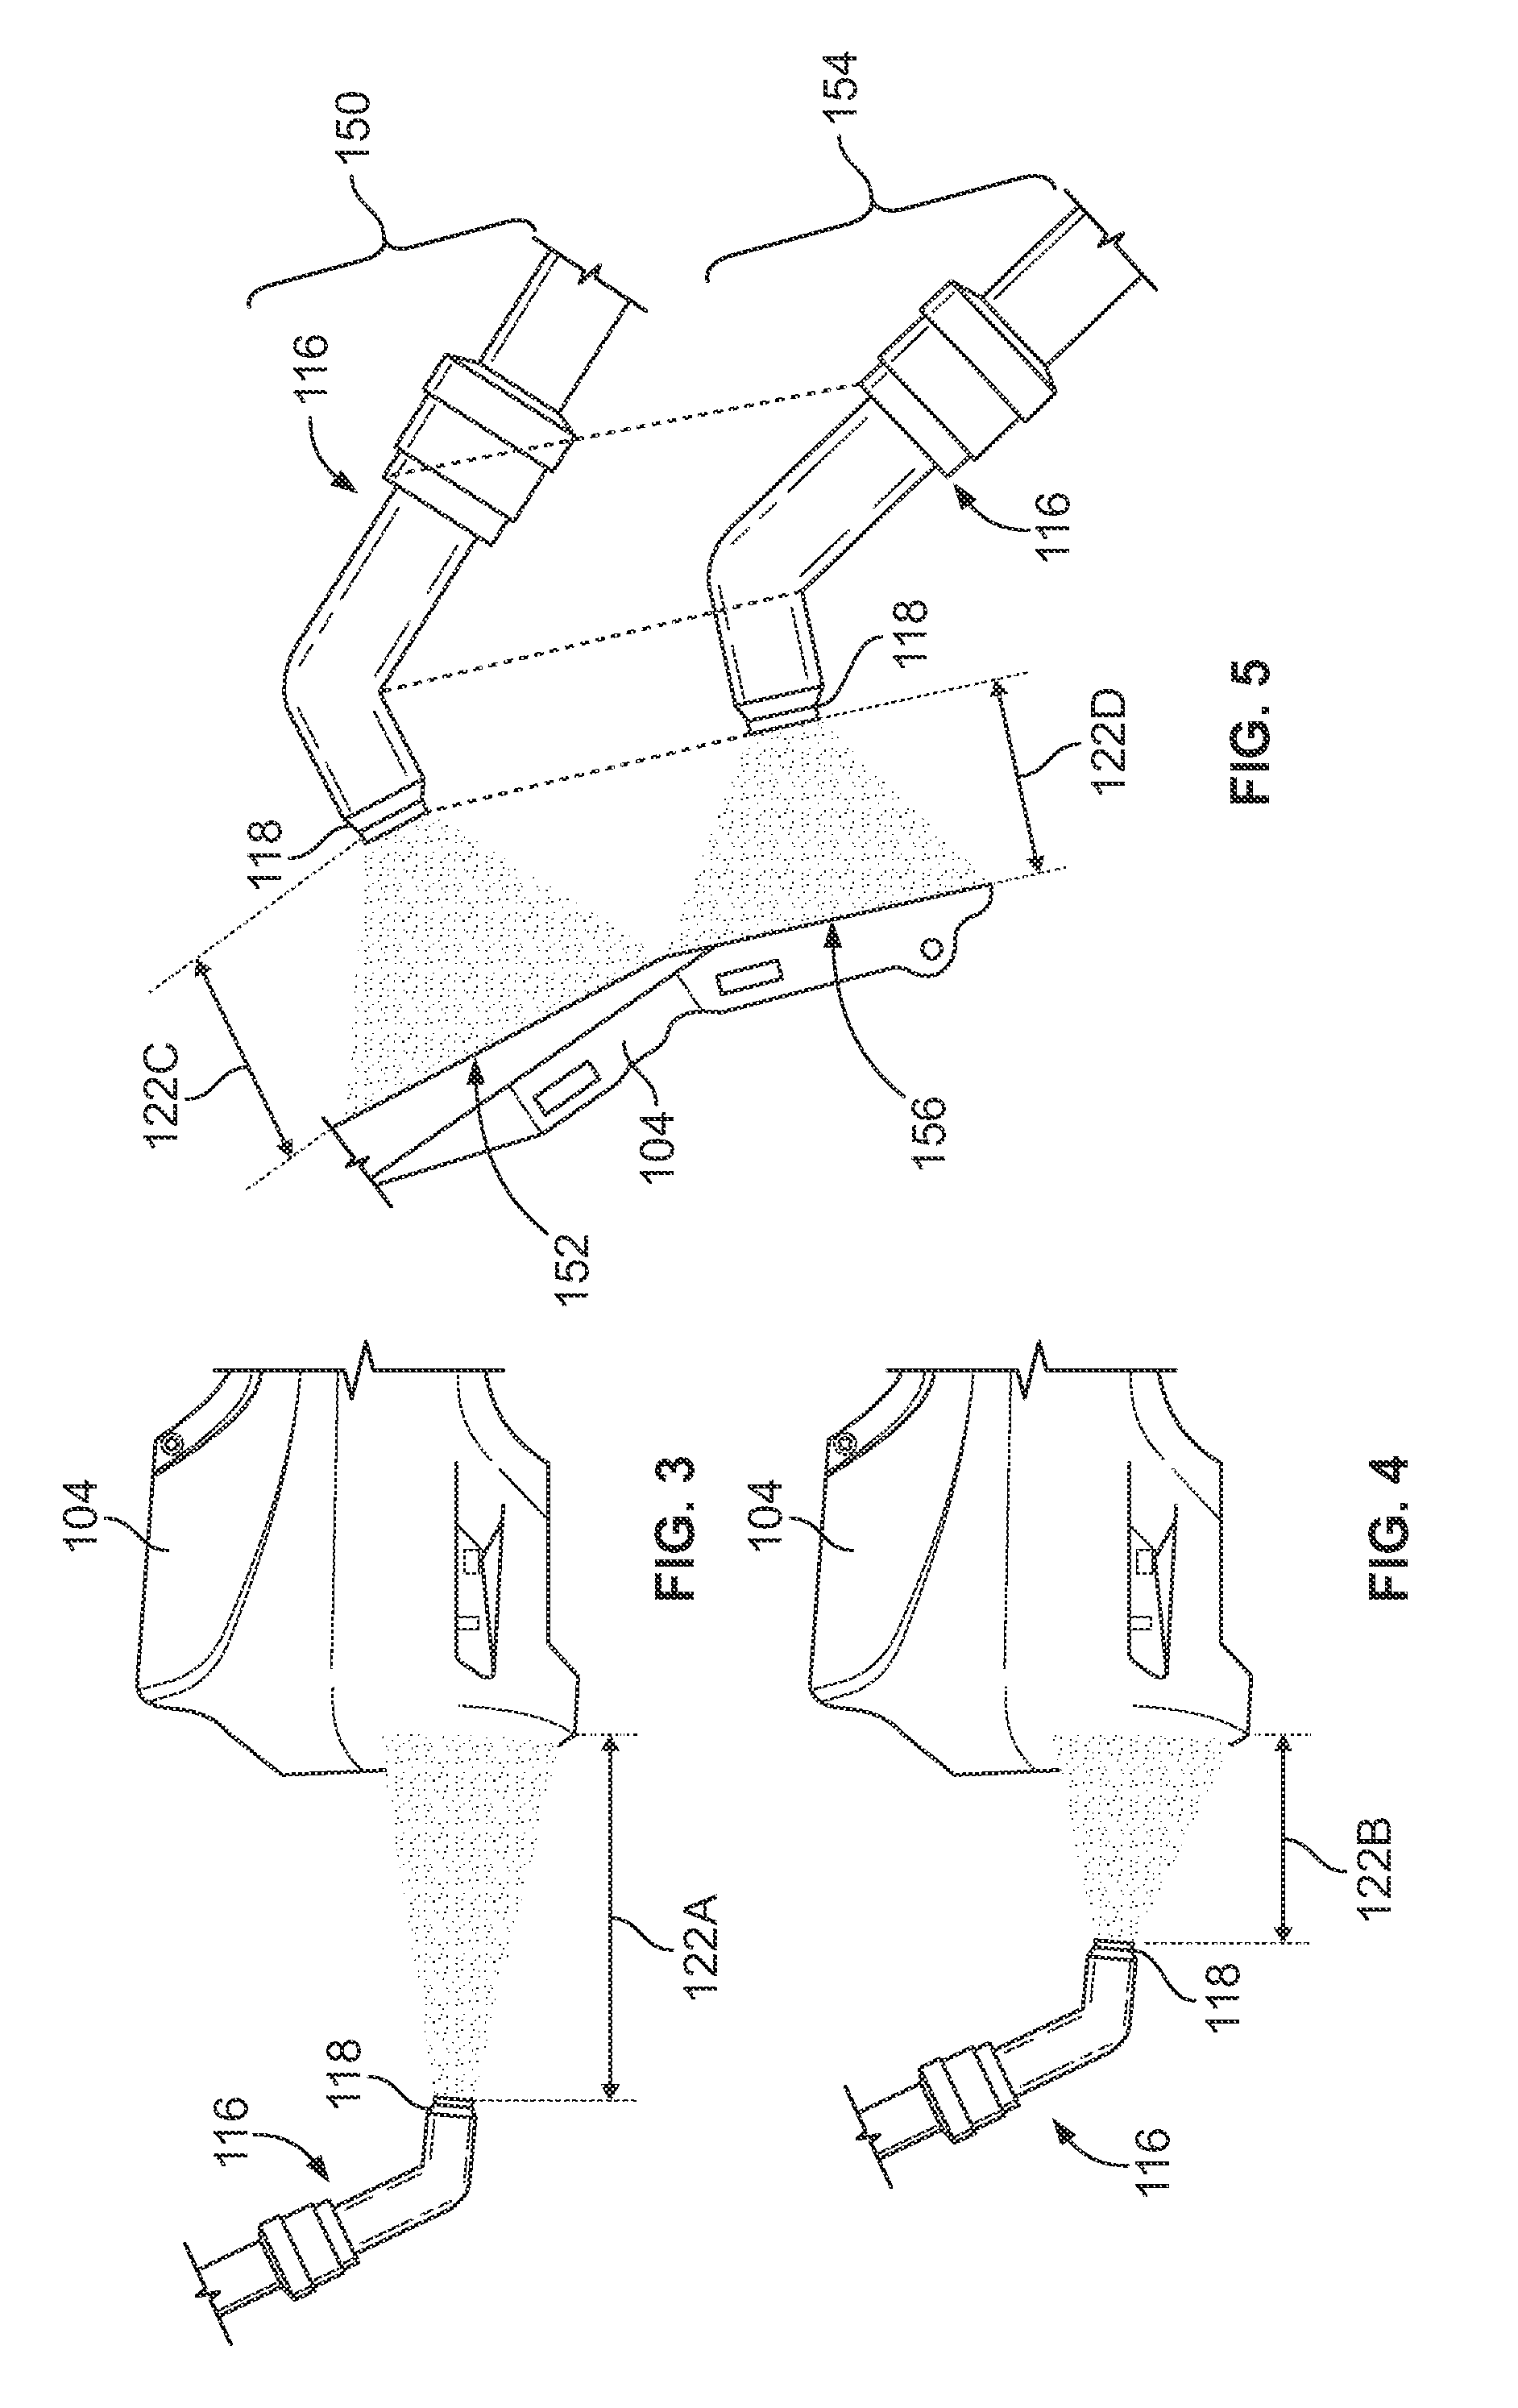 Paint robot system and method for spray painting a workpiece